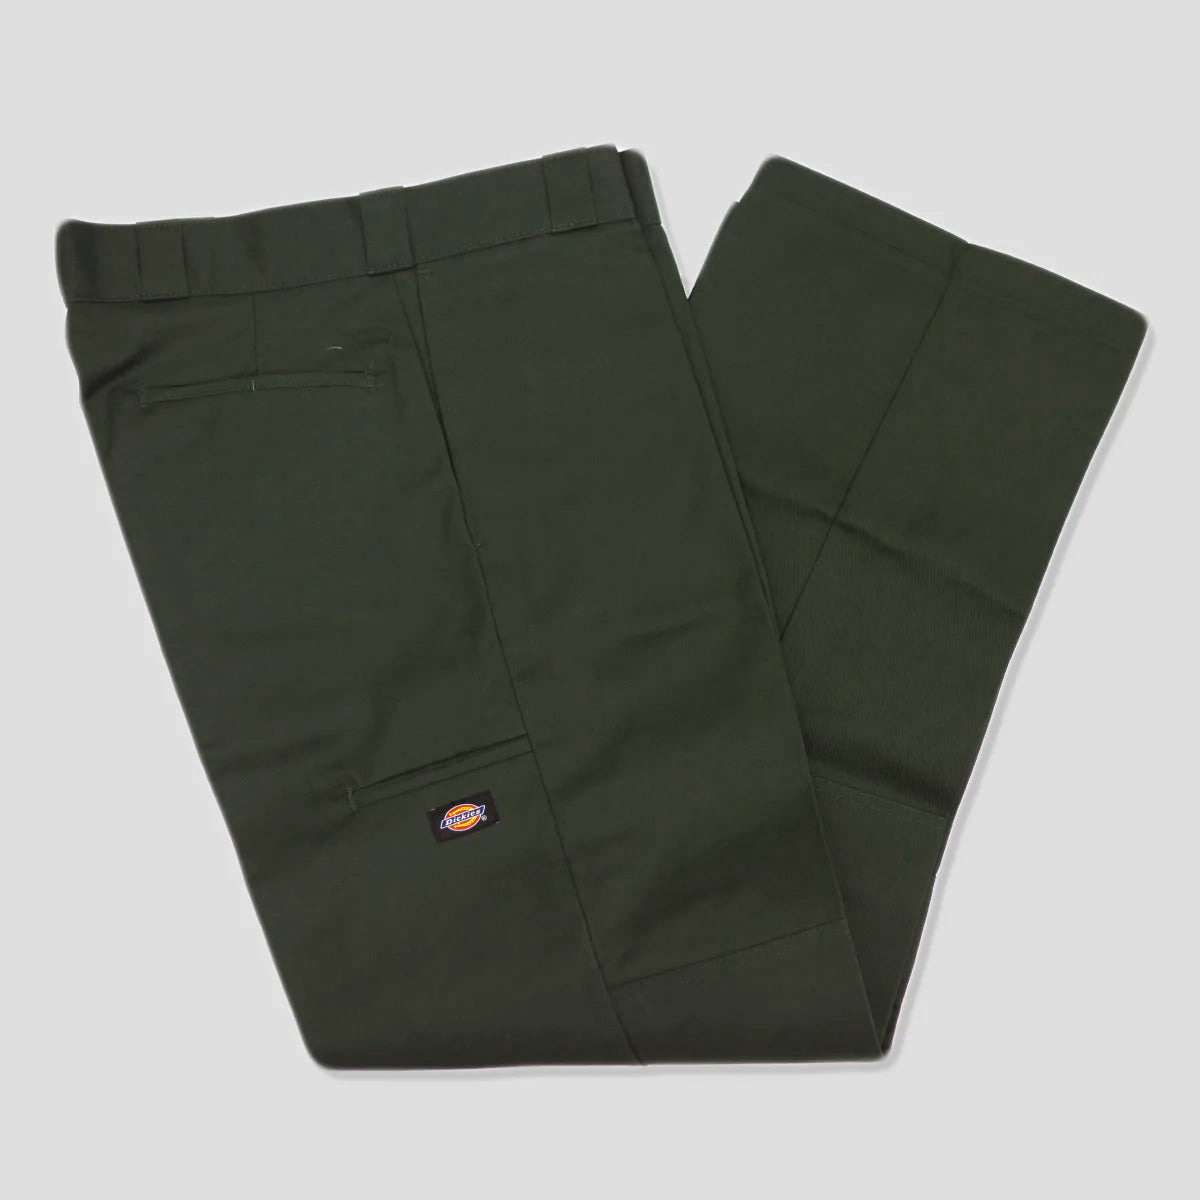 DICKIES "DOUBLE KNEE" PANT OLIVE GREEN